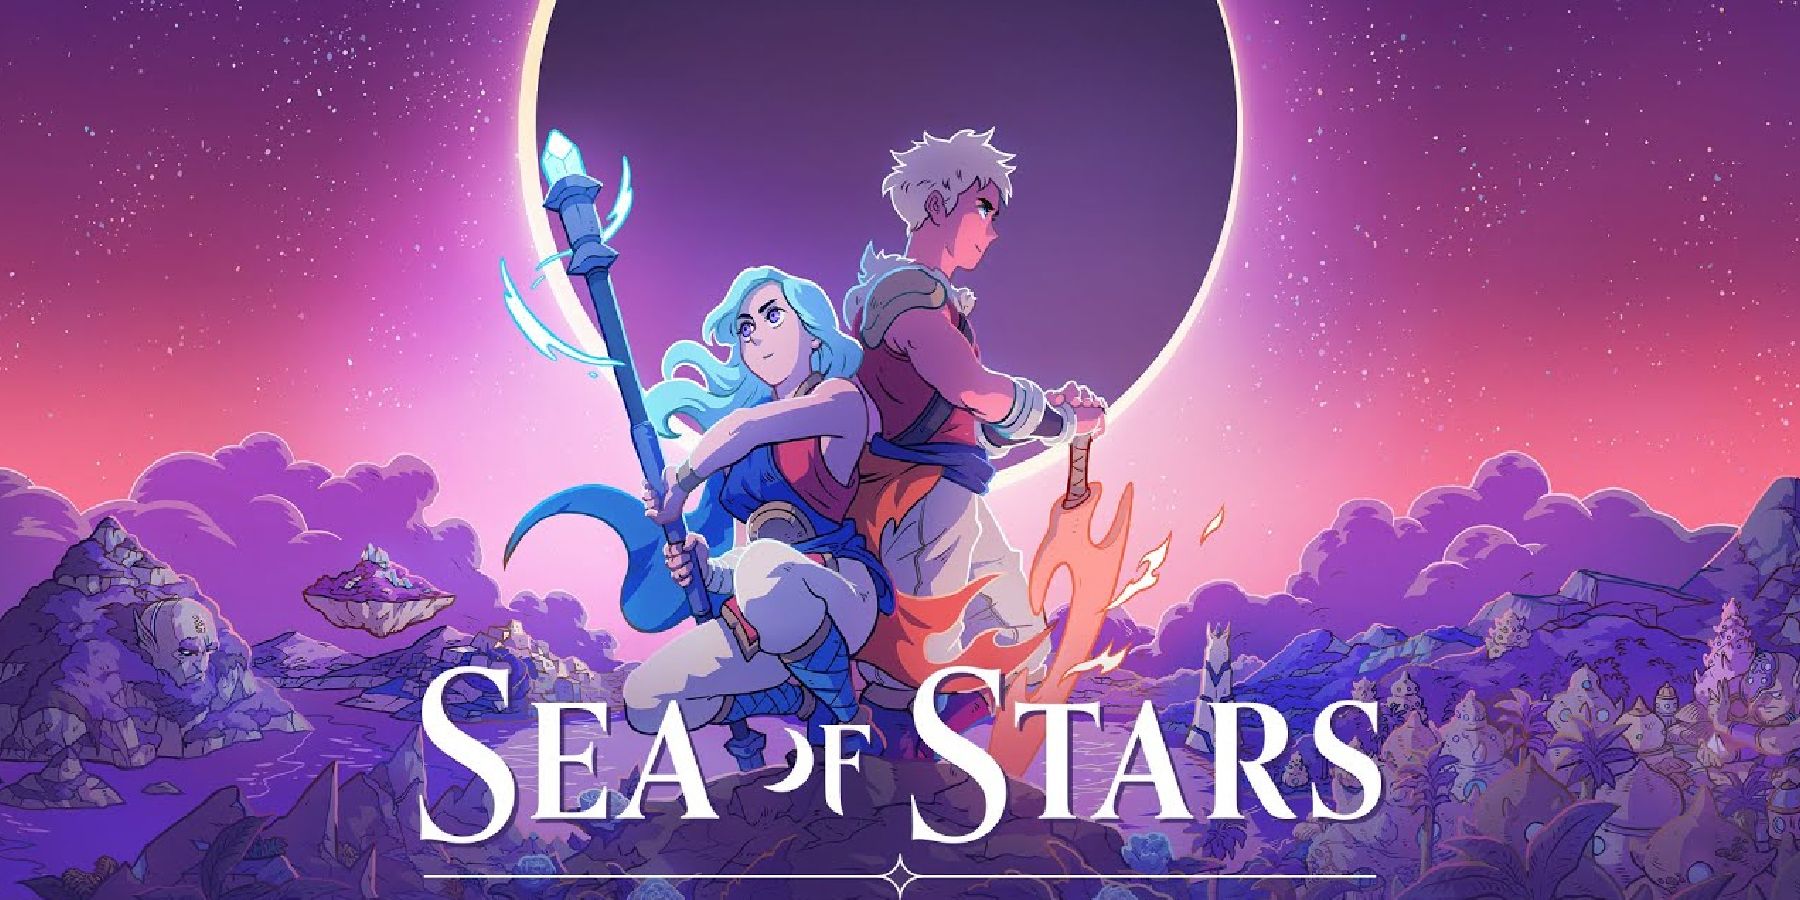 Sea of Stars Will Be Available on PlayStation in 2023